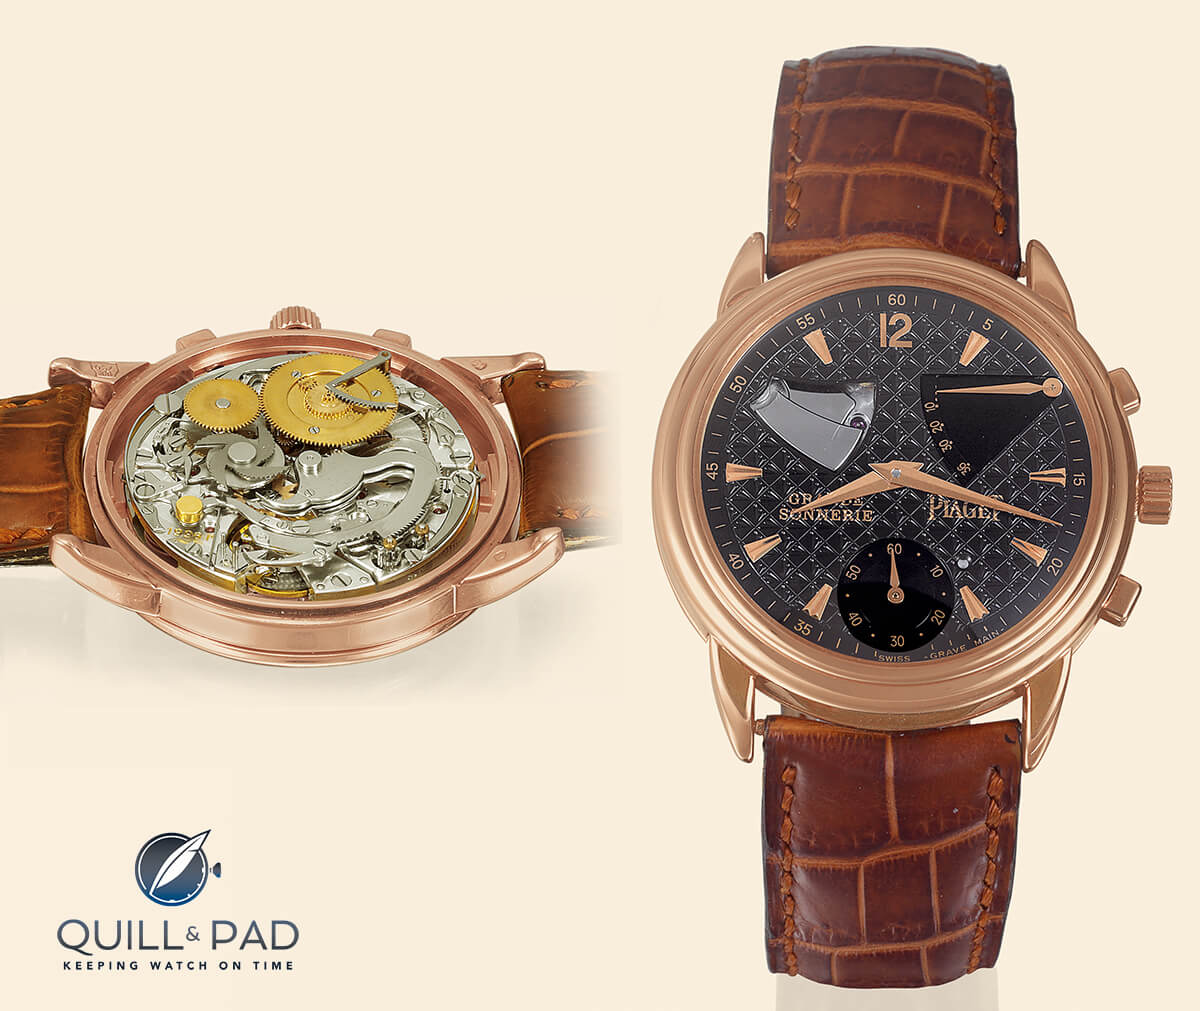 Piaget grande sonnerie from the 2006 Antiquorum catalogue